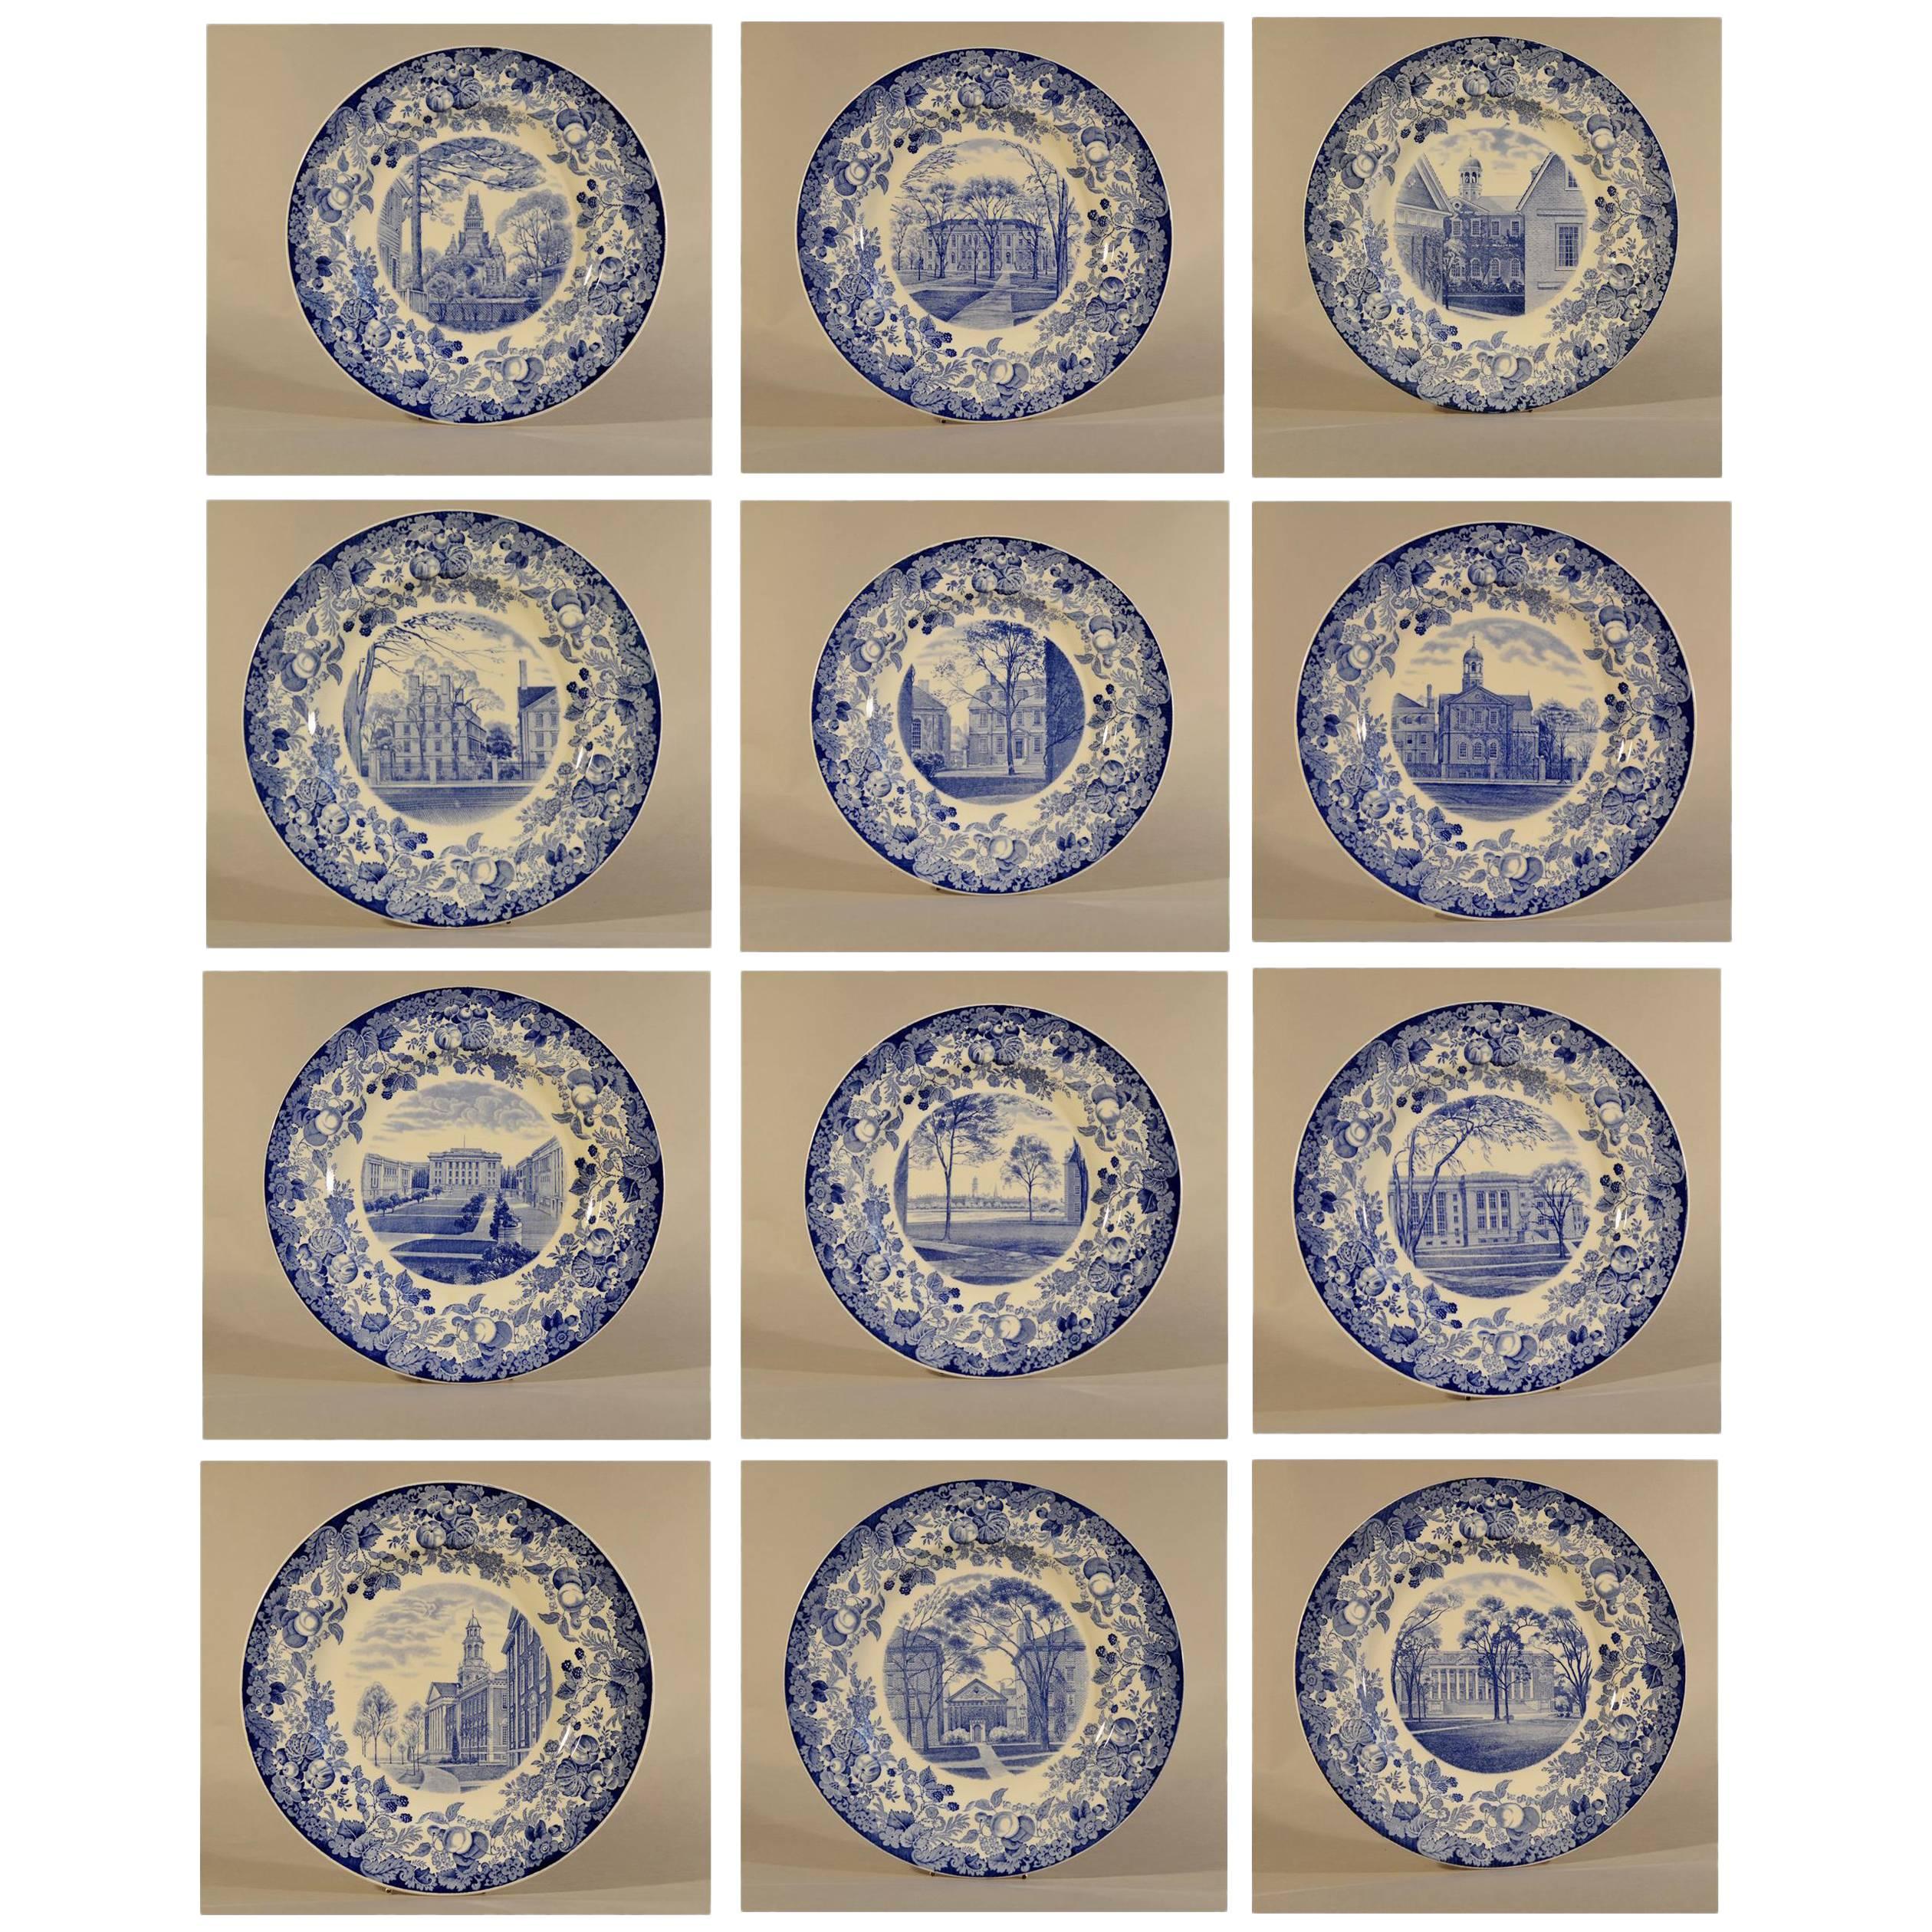 Wedgwood Blue and White Pottery Set of 12 Plates with Harvard Scenes, 1927